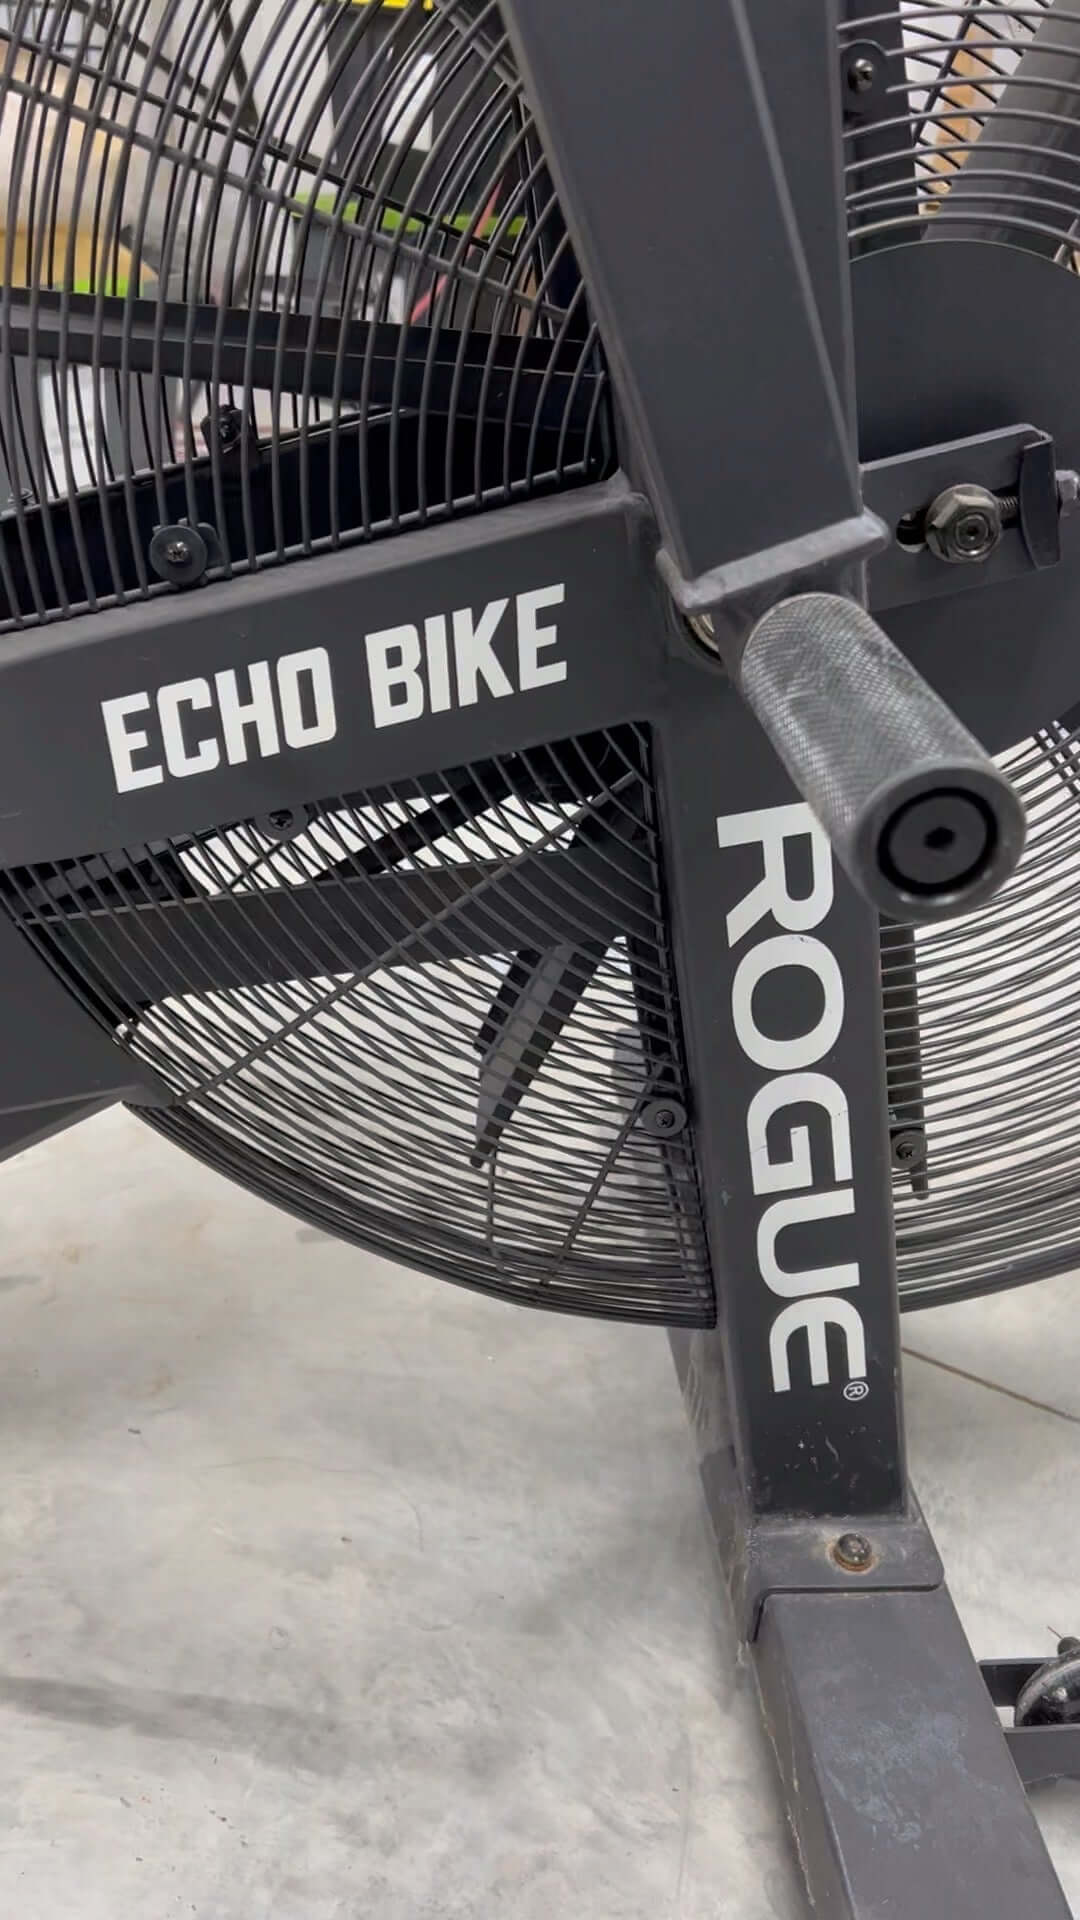 A Picture of the side of the Rogue Echo Bike